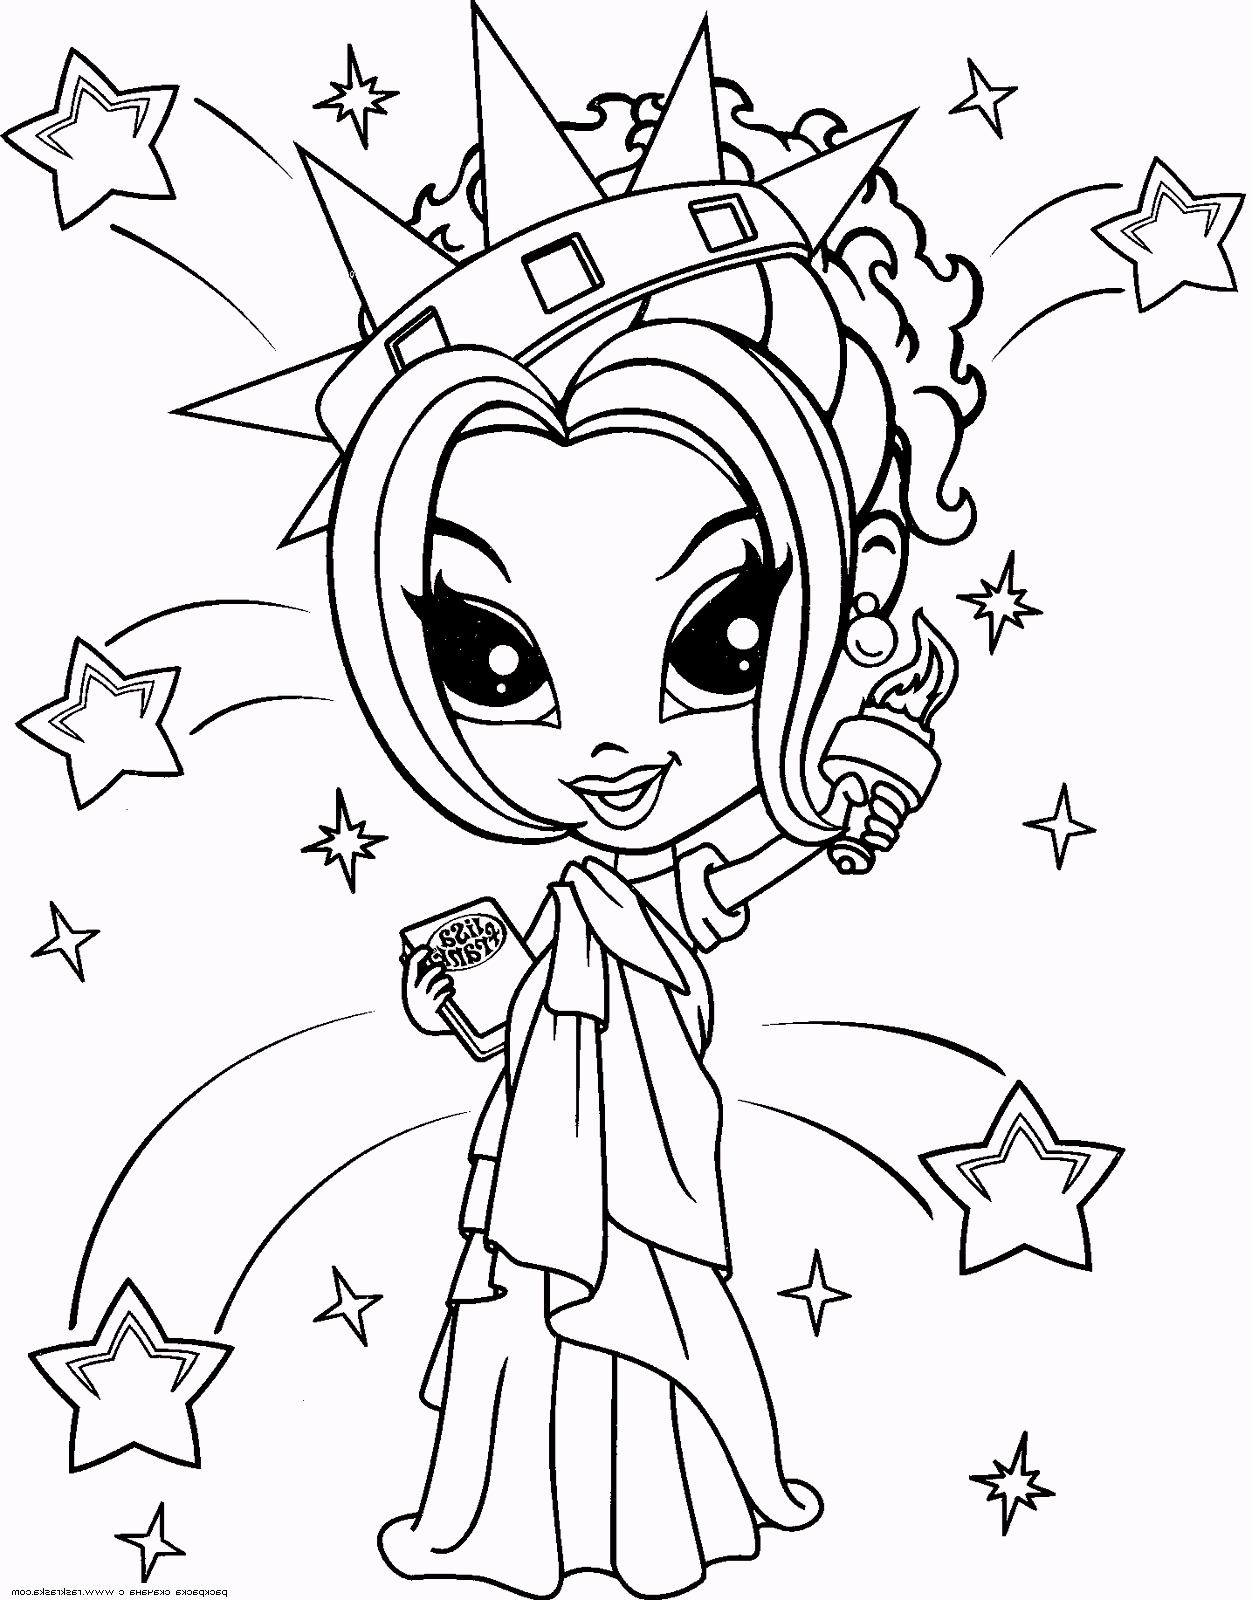 lisa-frank-coloring-pages-02